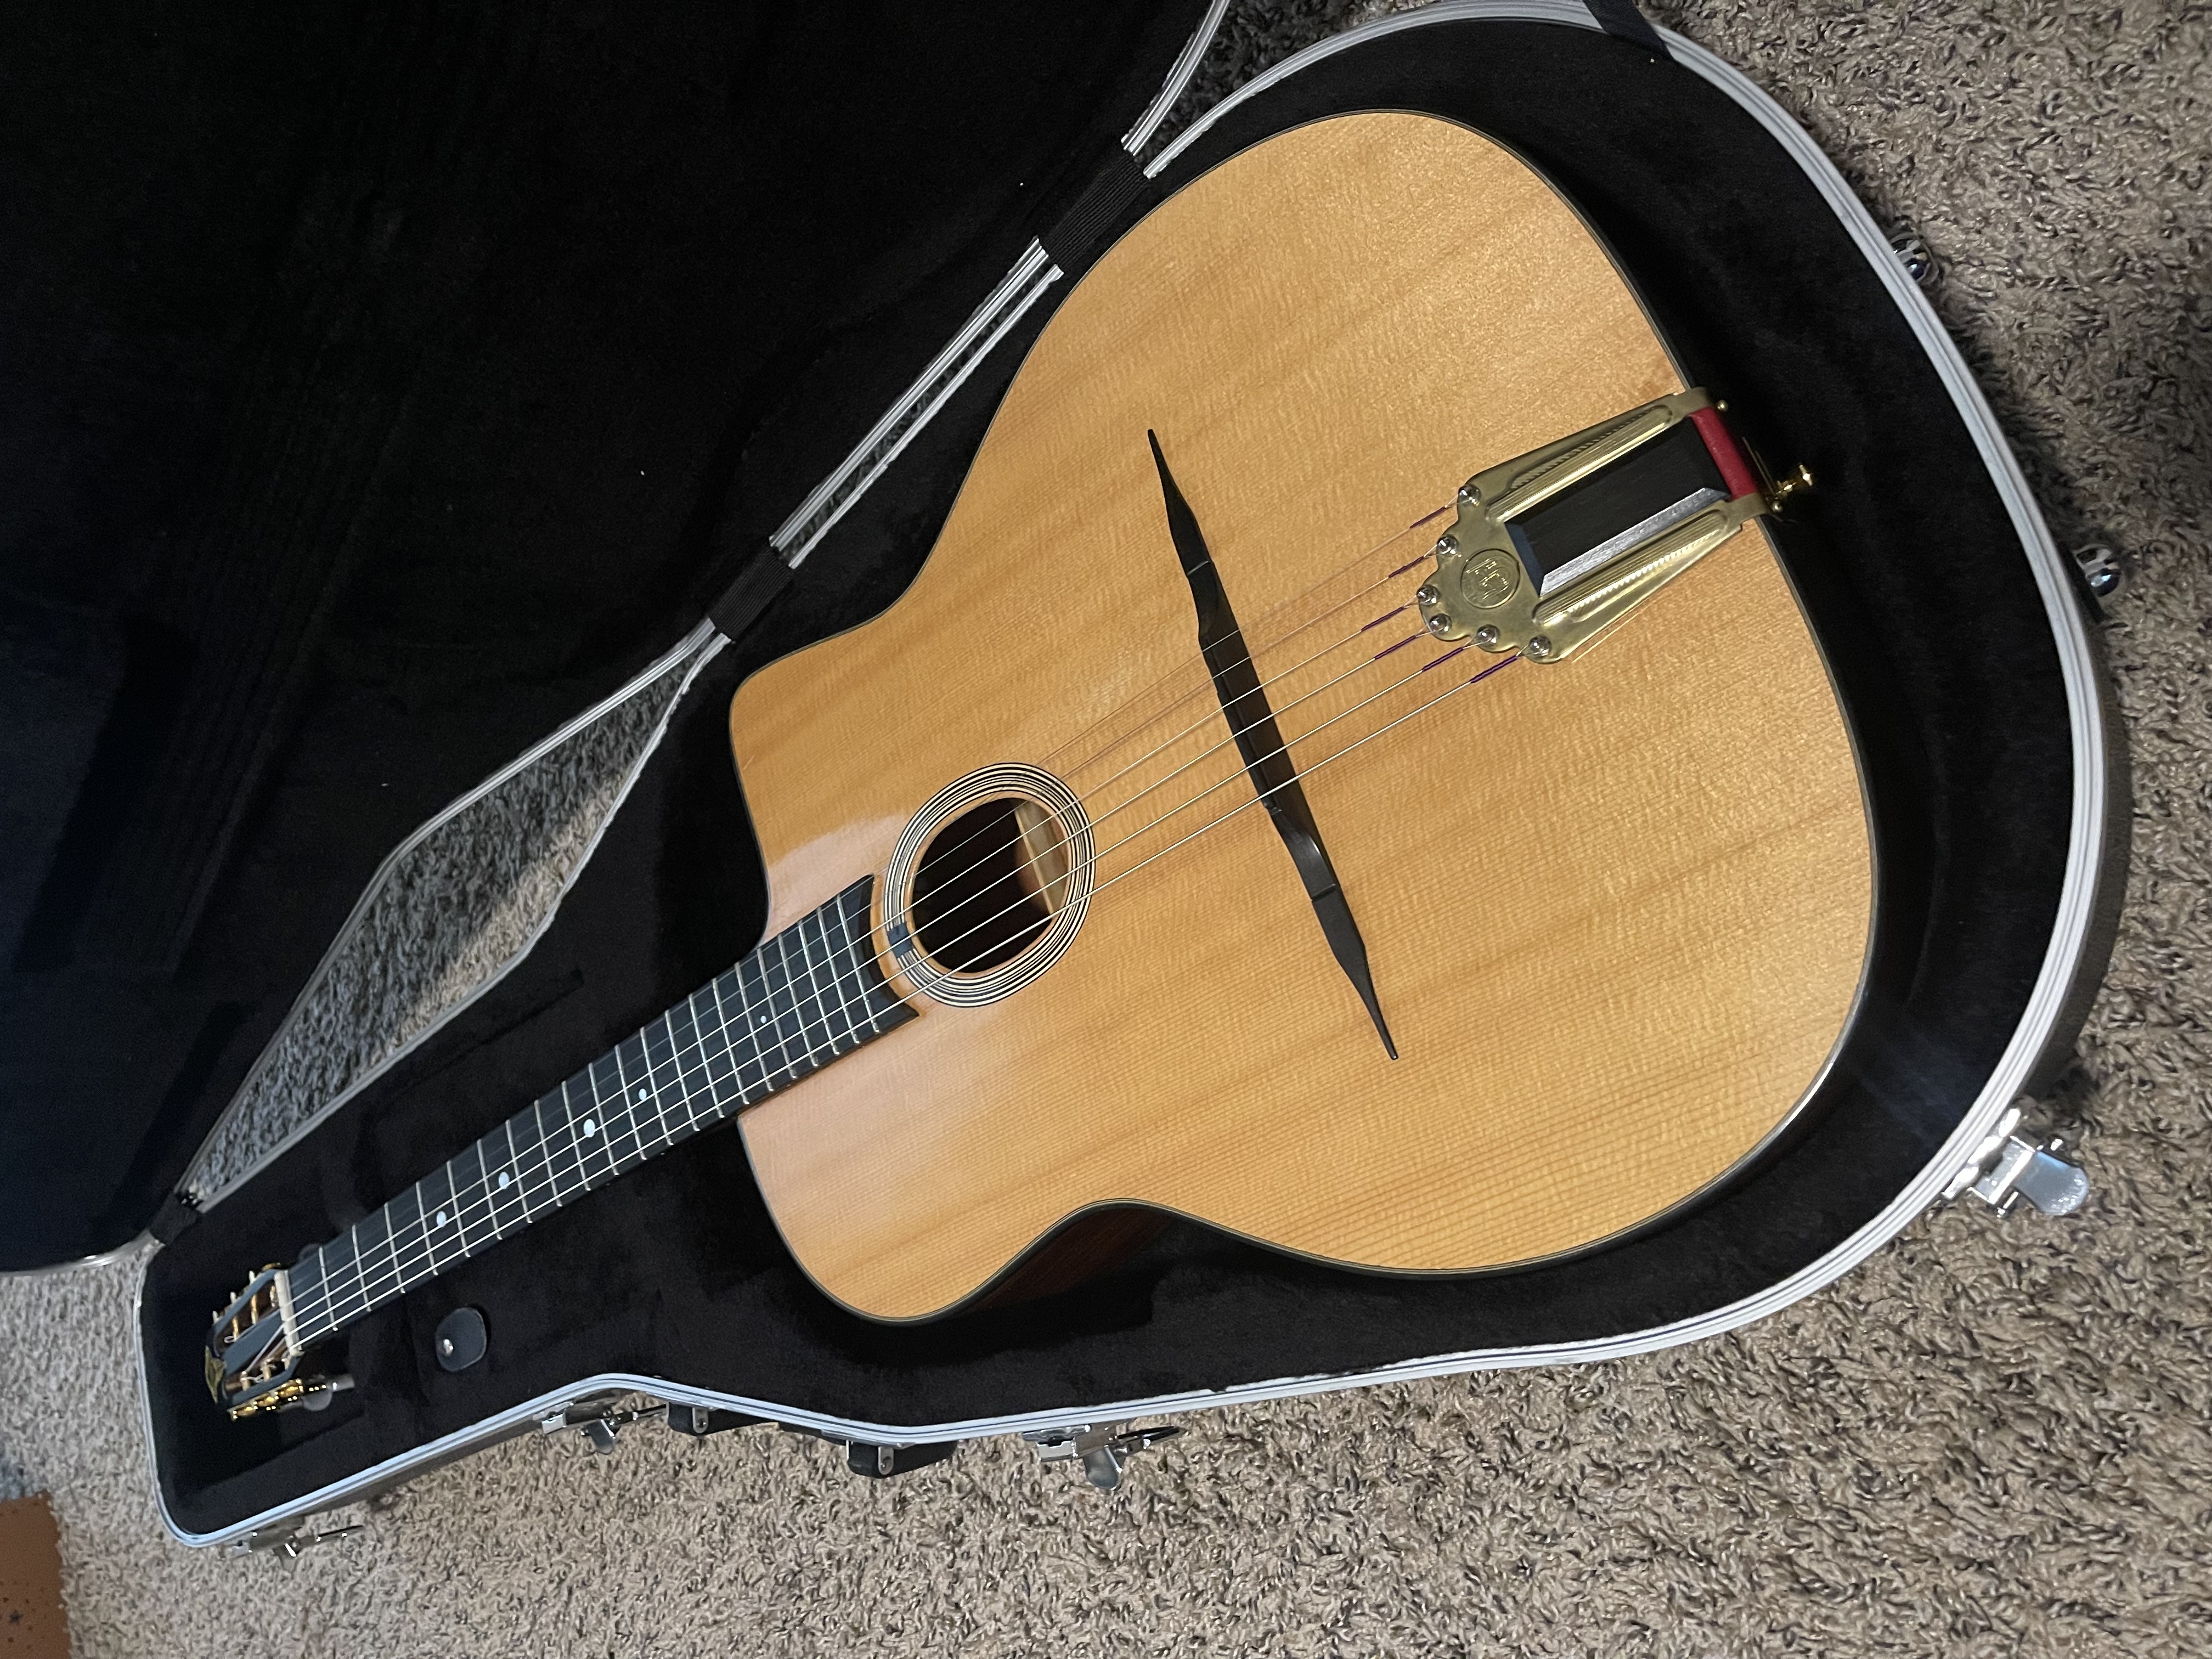 Where do you put your humidifier? - The Acoustic Guitar Forum